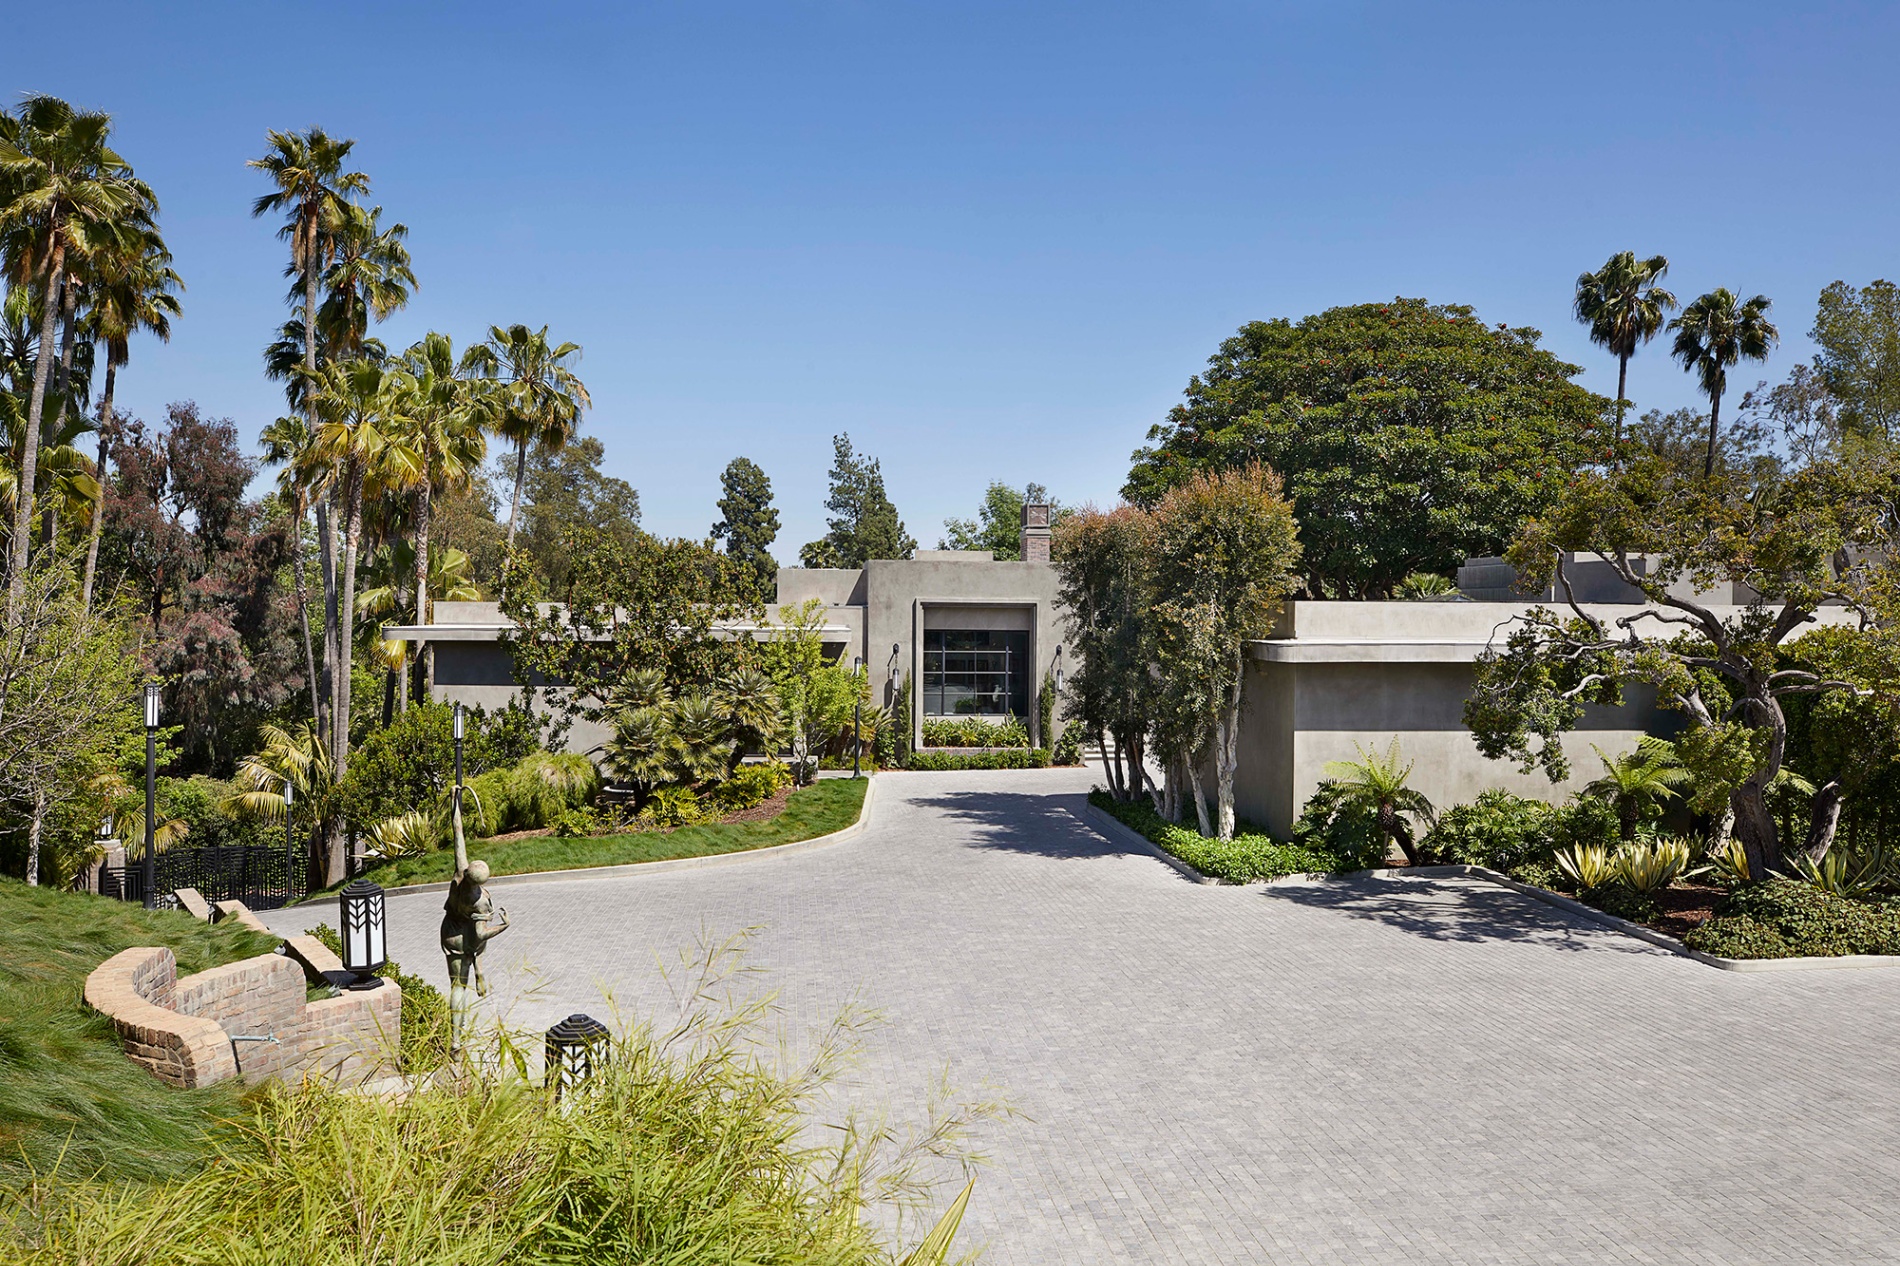 Los Angeles Art Deco Mansion His Market for $85 Million - Bloomberg